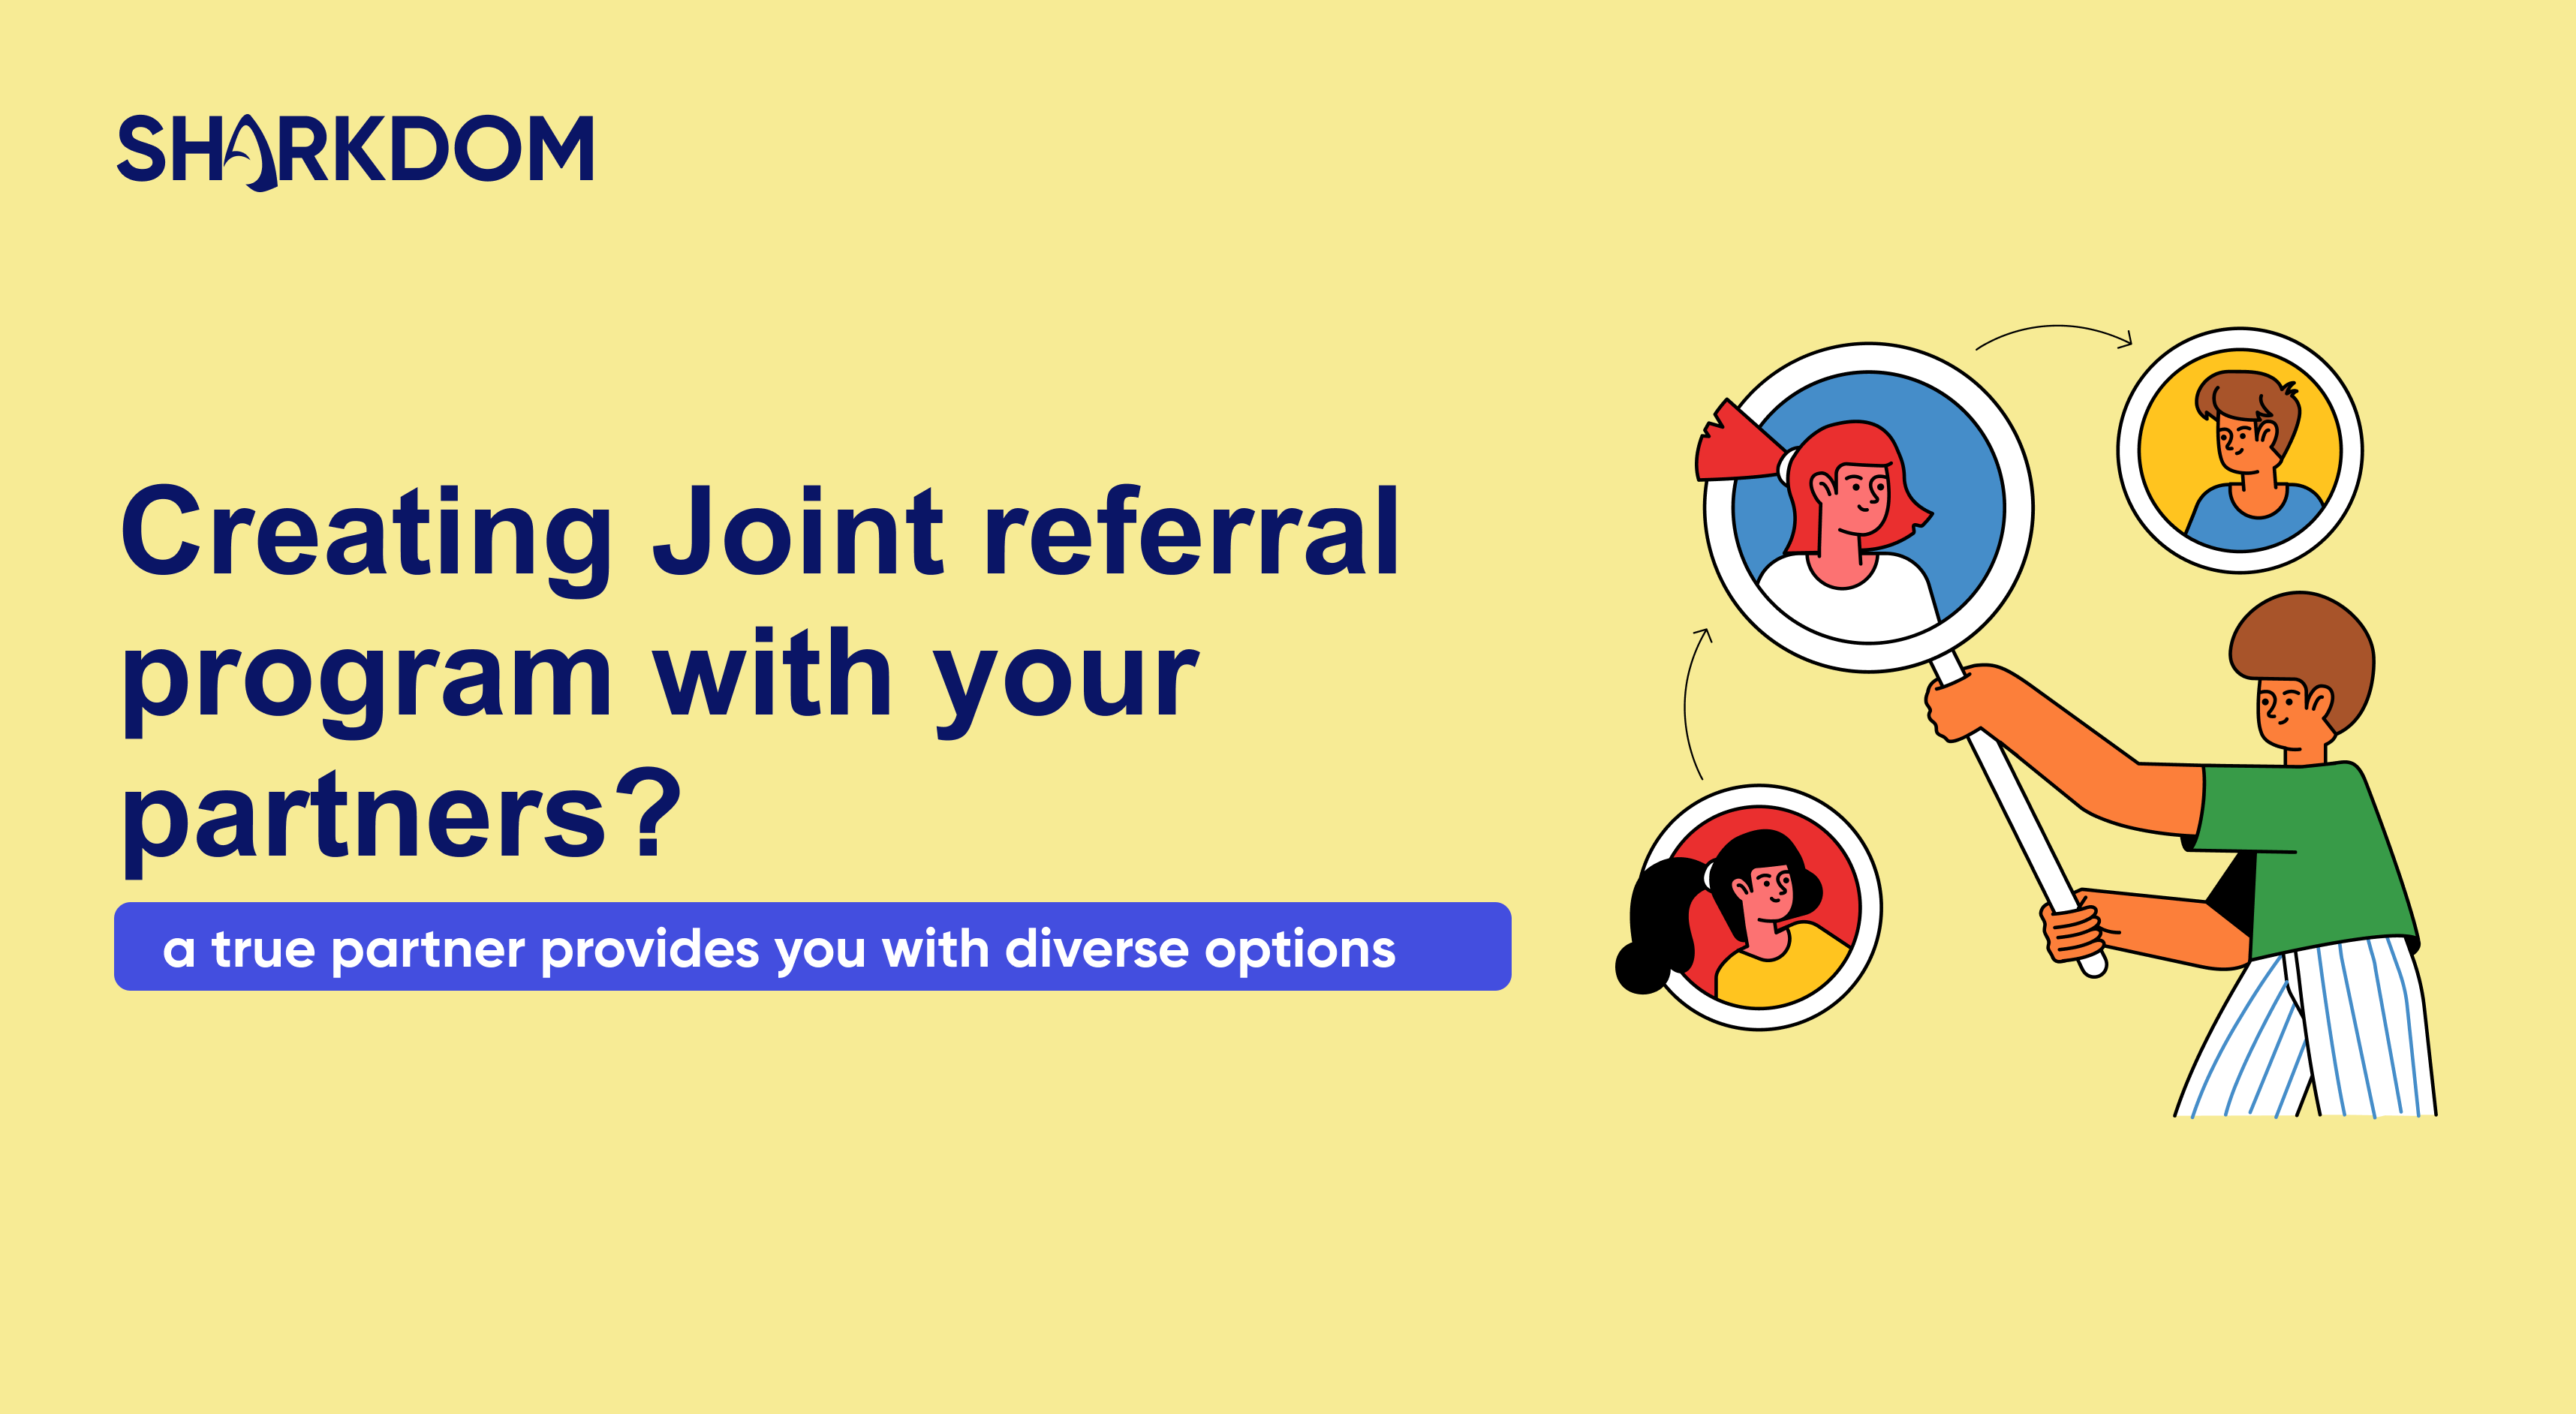 How to win more customers through referral from your partners